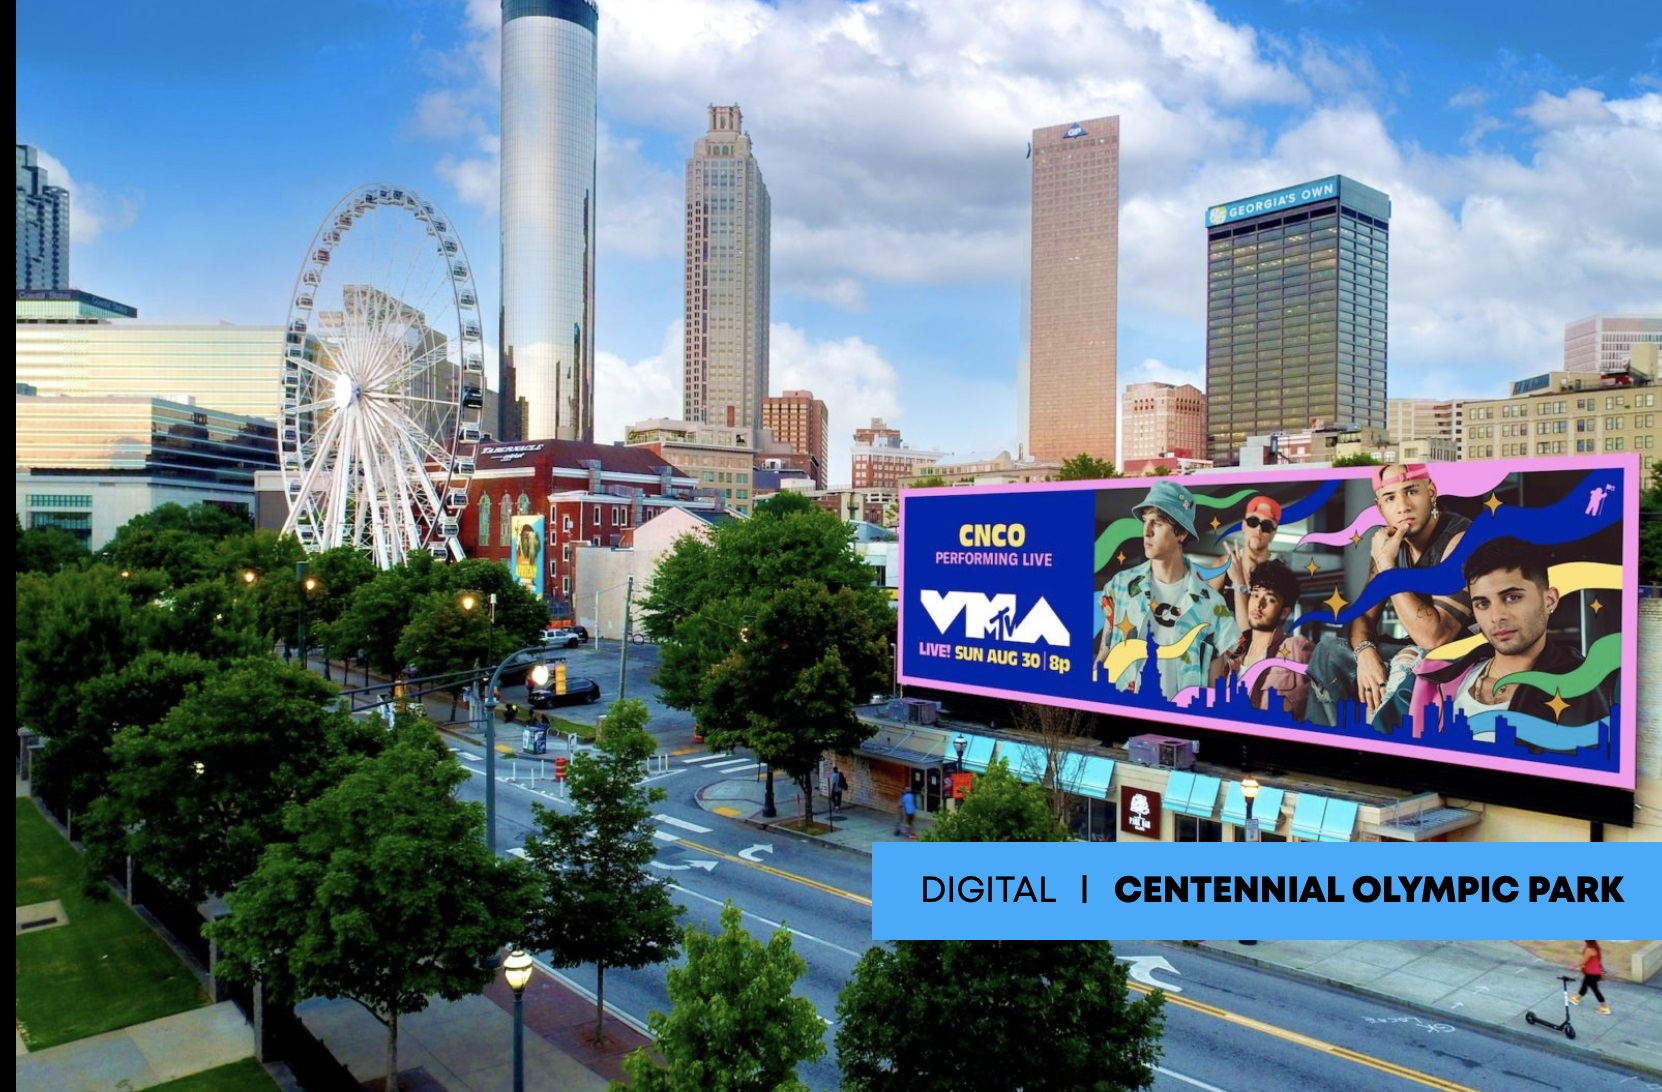 Atlanta Spectacular Billboards: Eye-catching and vibrant advertising displays that contribute to the dynamic cityscape of Atlanta.